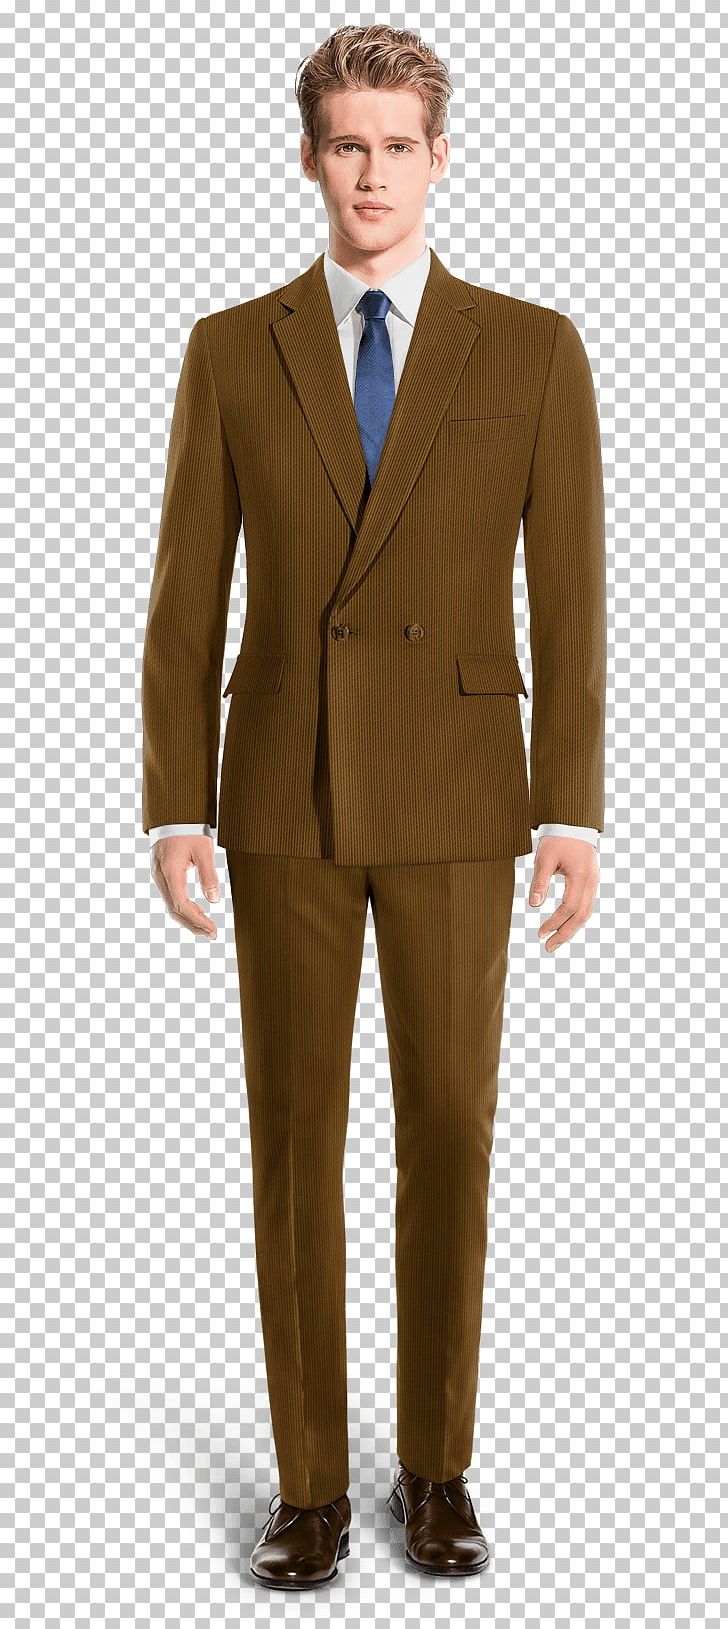 Suit Pants Jacket Chino Cloth Cotton PNG, Clipart, Bespoke Tailoring, Blazer, Blue, Businessperson, Chino Cloth Free PNG Download